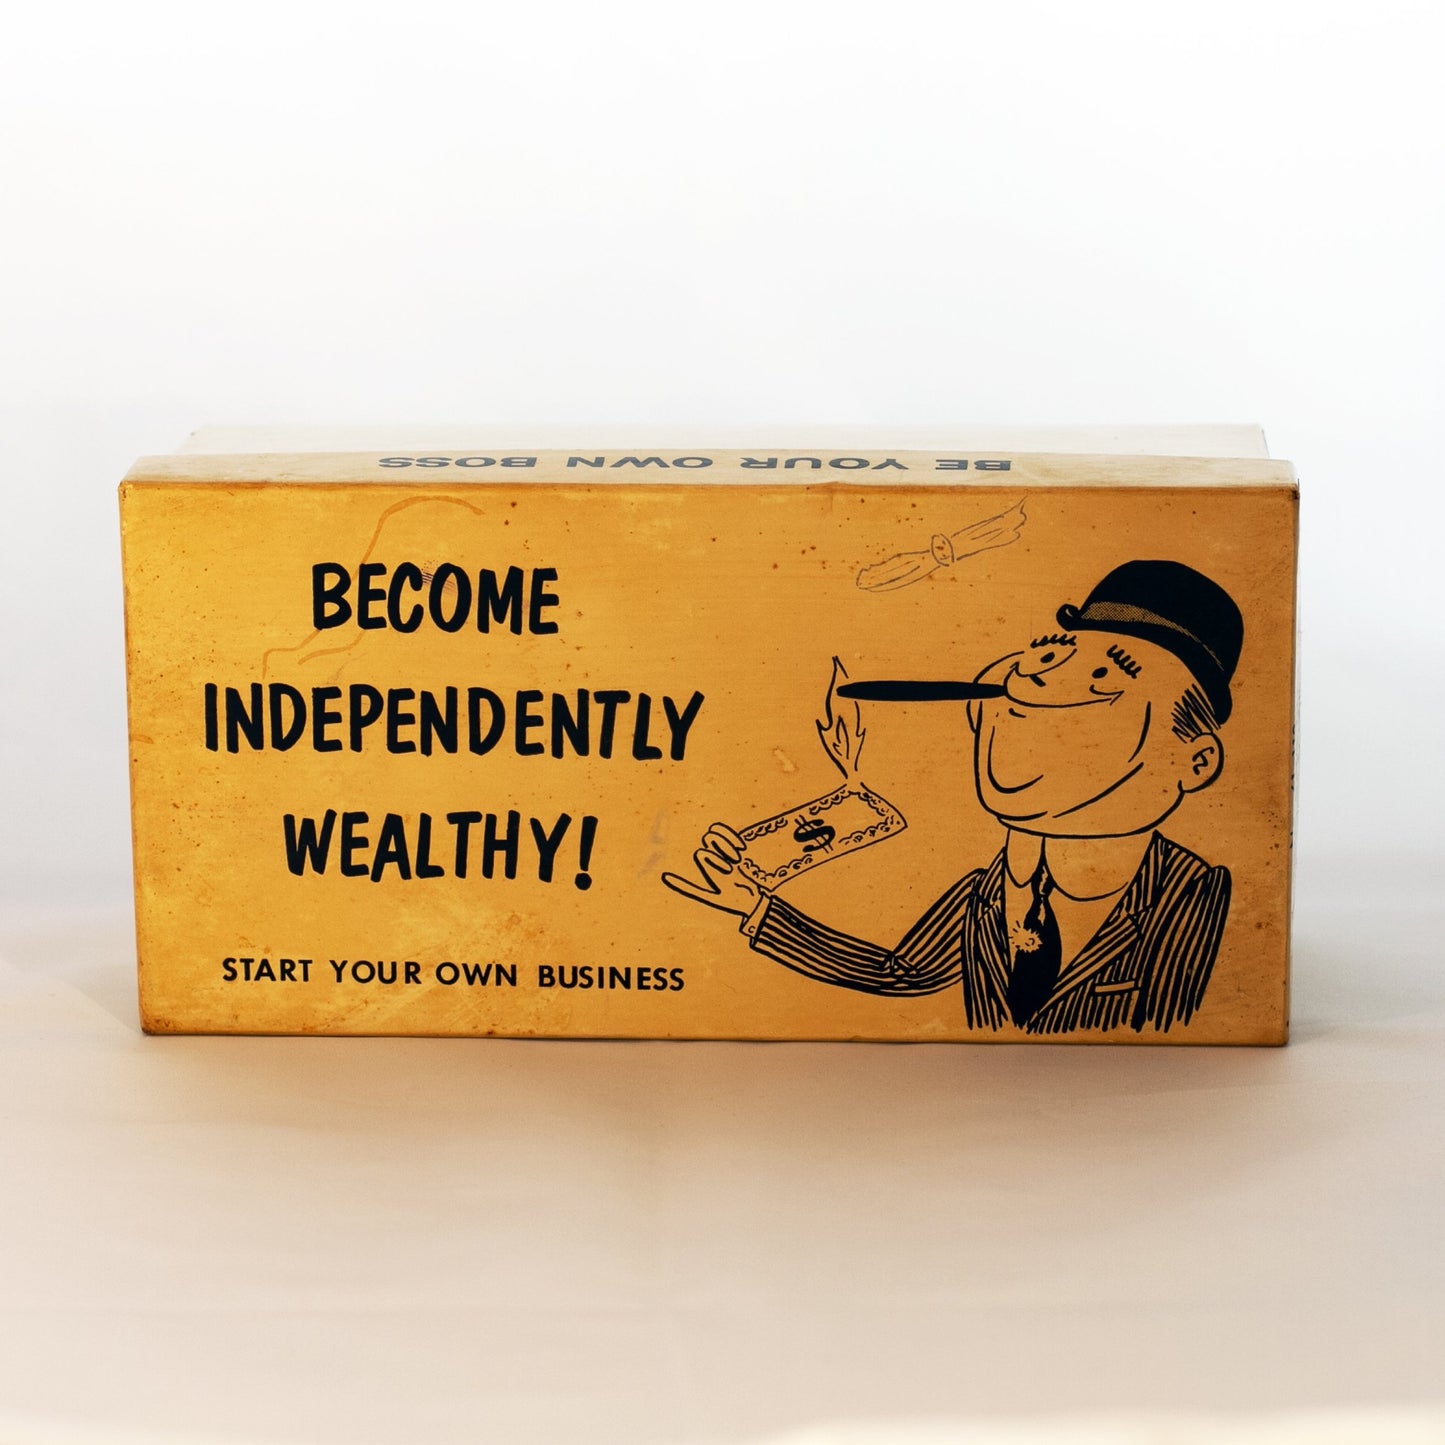 Leister Game Company Toledo OH BECOME INDEPENDENTLY WEALTHY! Novelty Gag Gift Circa 1961